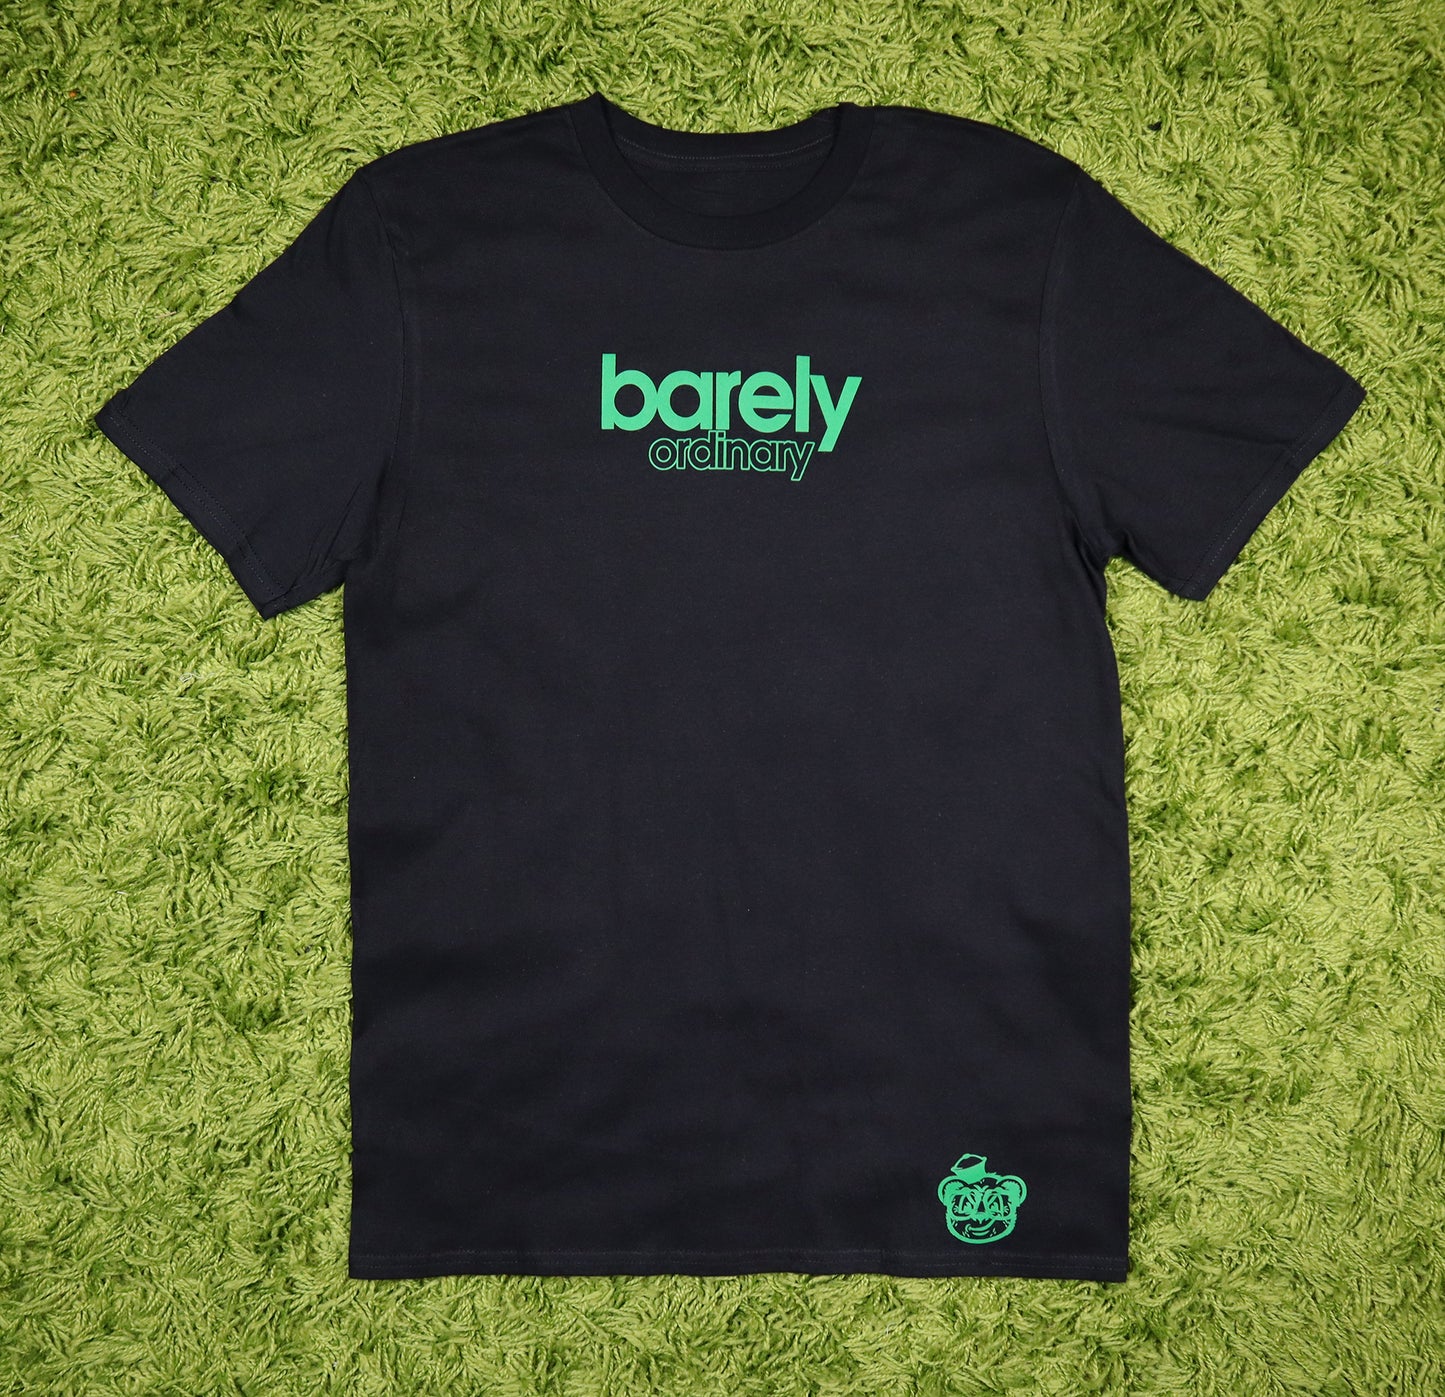 Barely "Stamped" Logo Tee (Blk/Grn) - Barely Ordinary